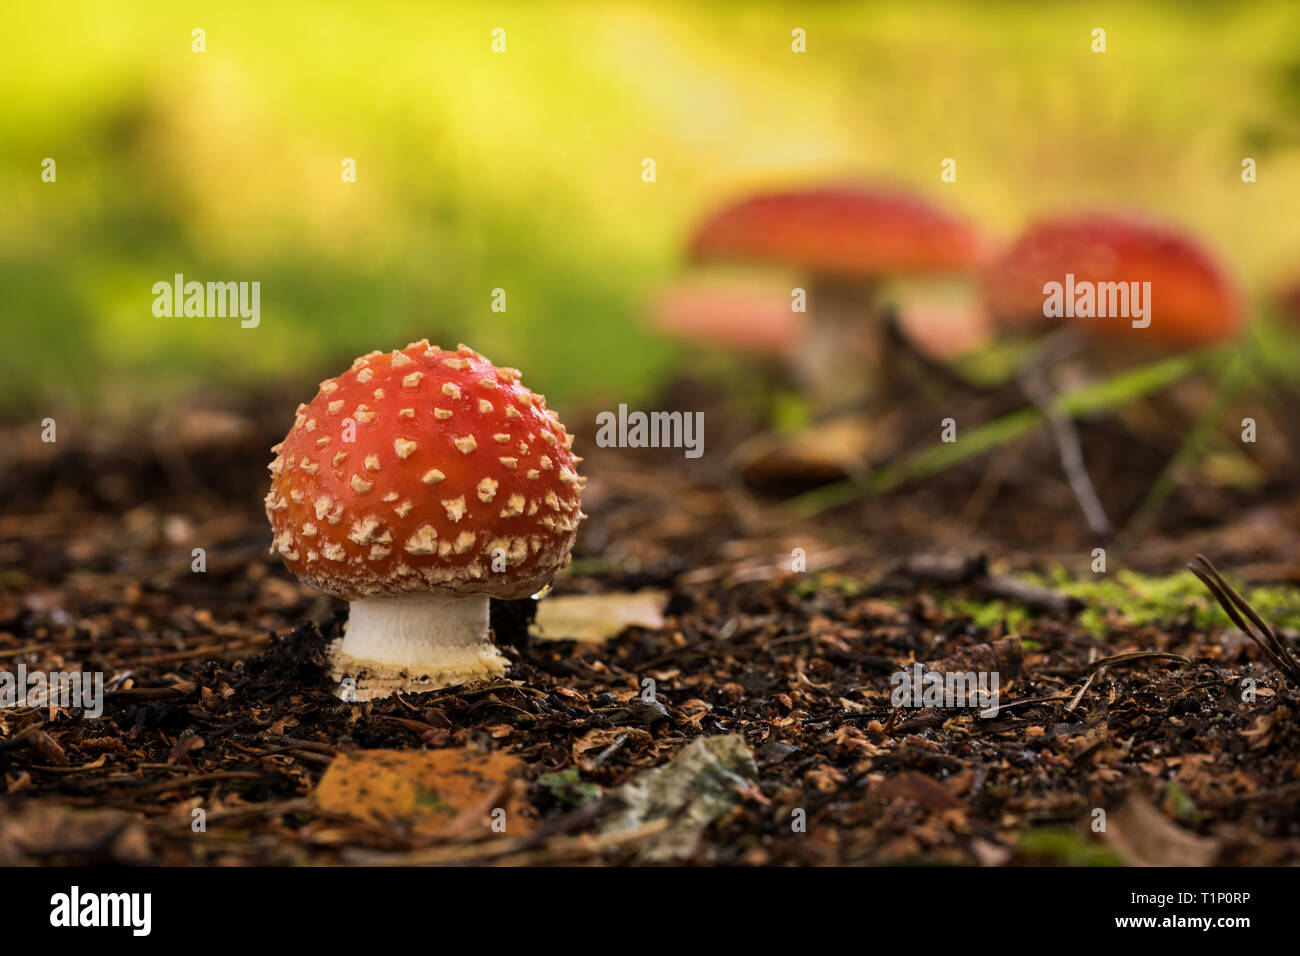 Amanita muscaria (Fly Agaric, Fly amanita, fairytale toadstool) in the forest, Poland, Europe Stock Photo